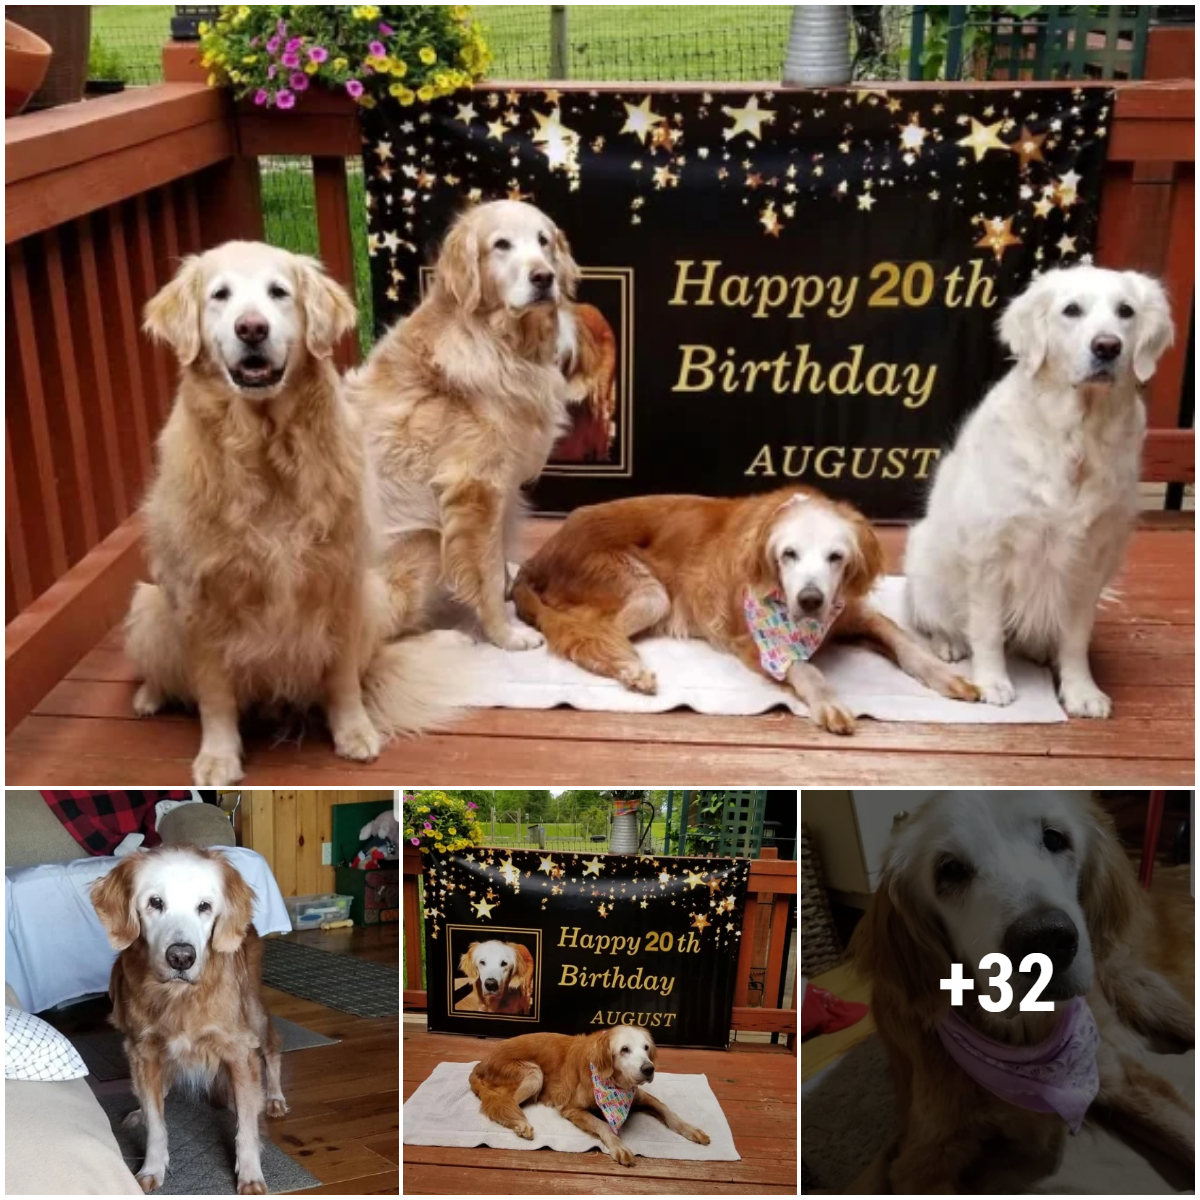 Introducing August, the world’s oldest 20-year-old golden retriever. To celebrate your birthday, send your best wishes to this retriever